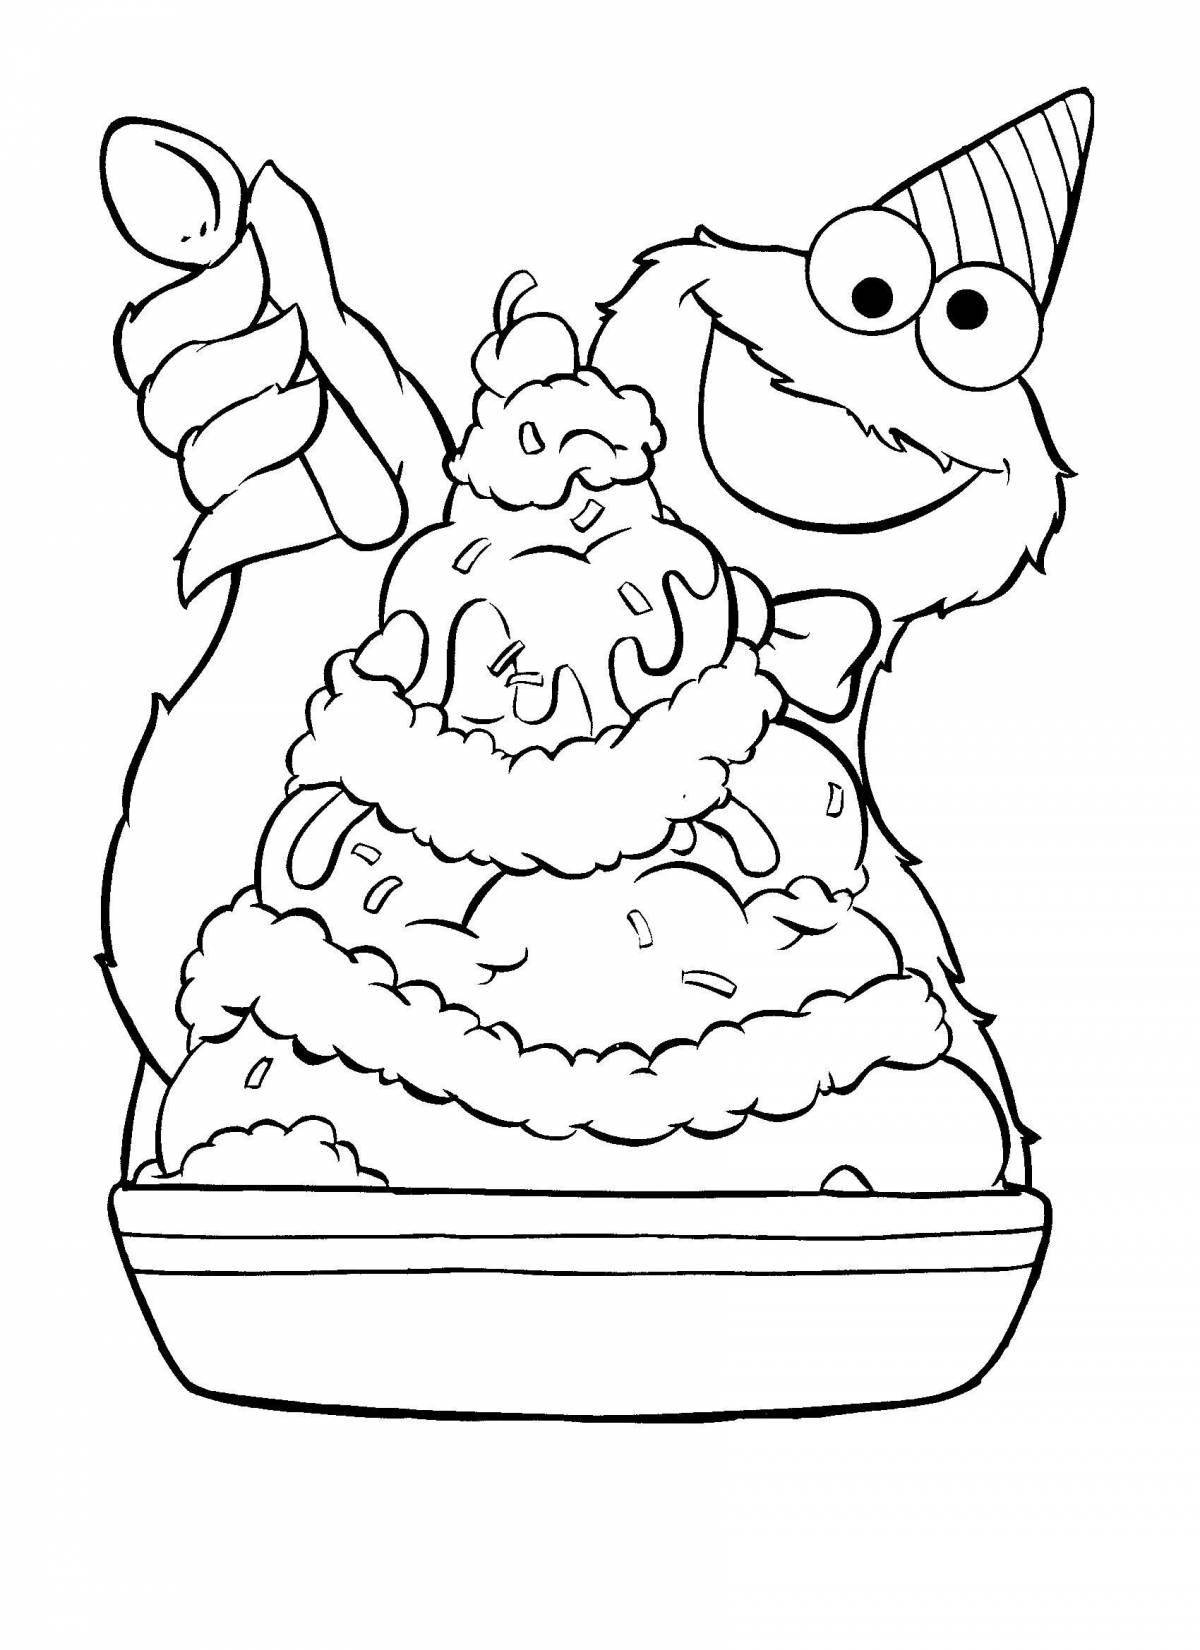 Colourful ice cream mask coloring page